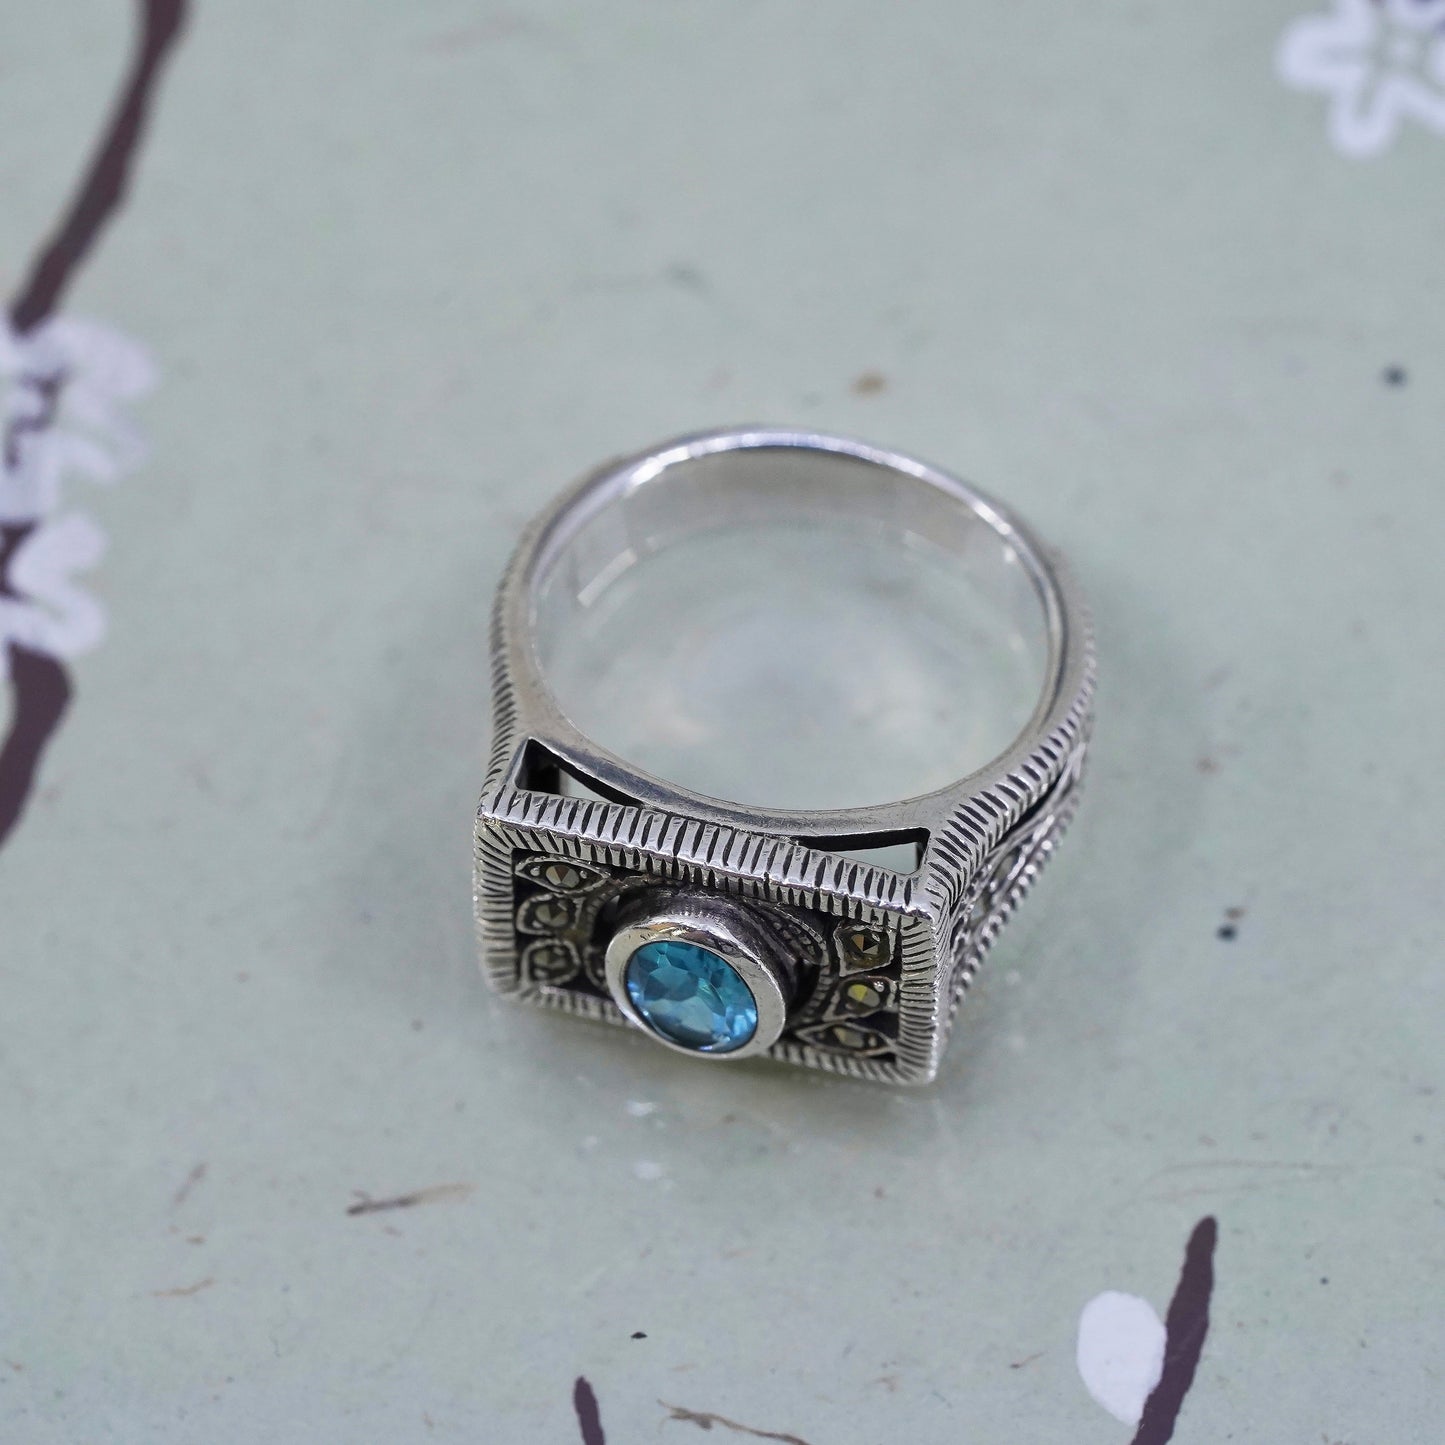 Size 9.25, Vintage sterling 925 silver handmade ring with topaz and marcasite